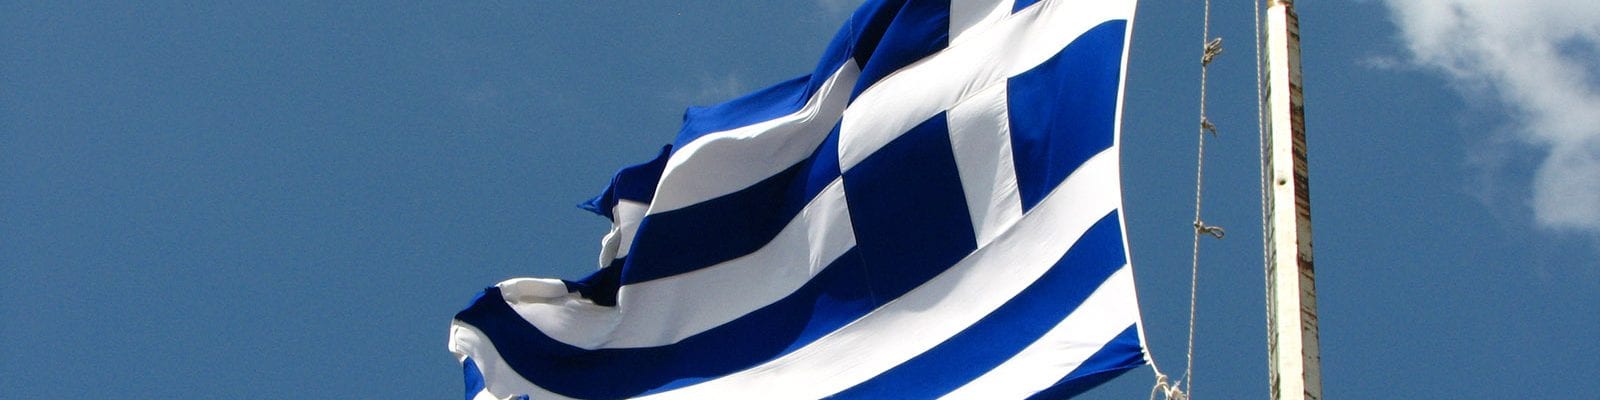 The flag of Greece flying in the sky.